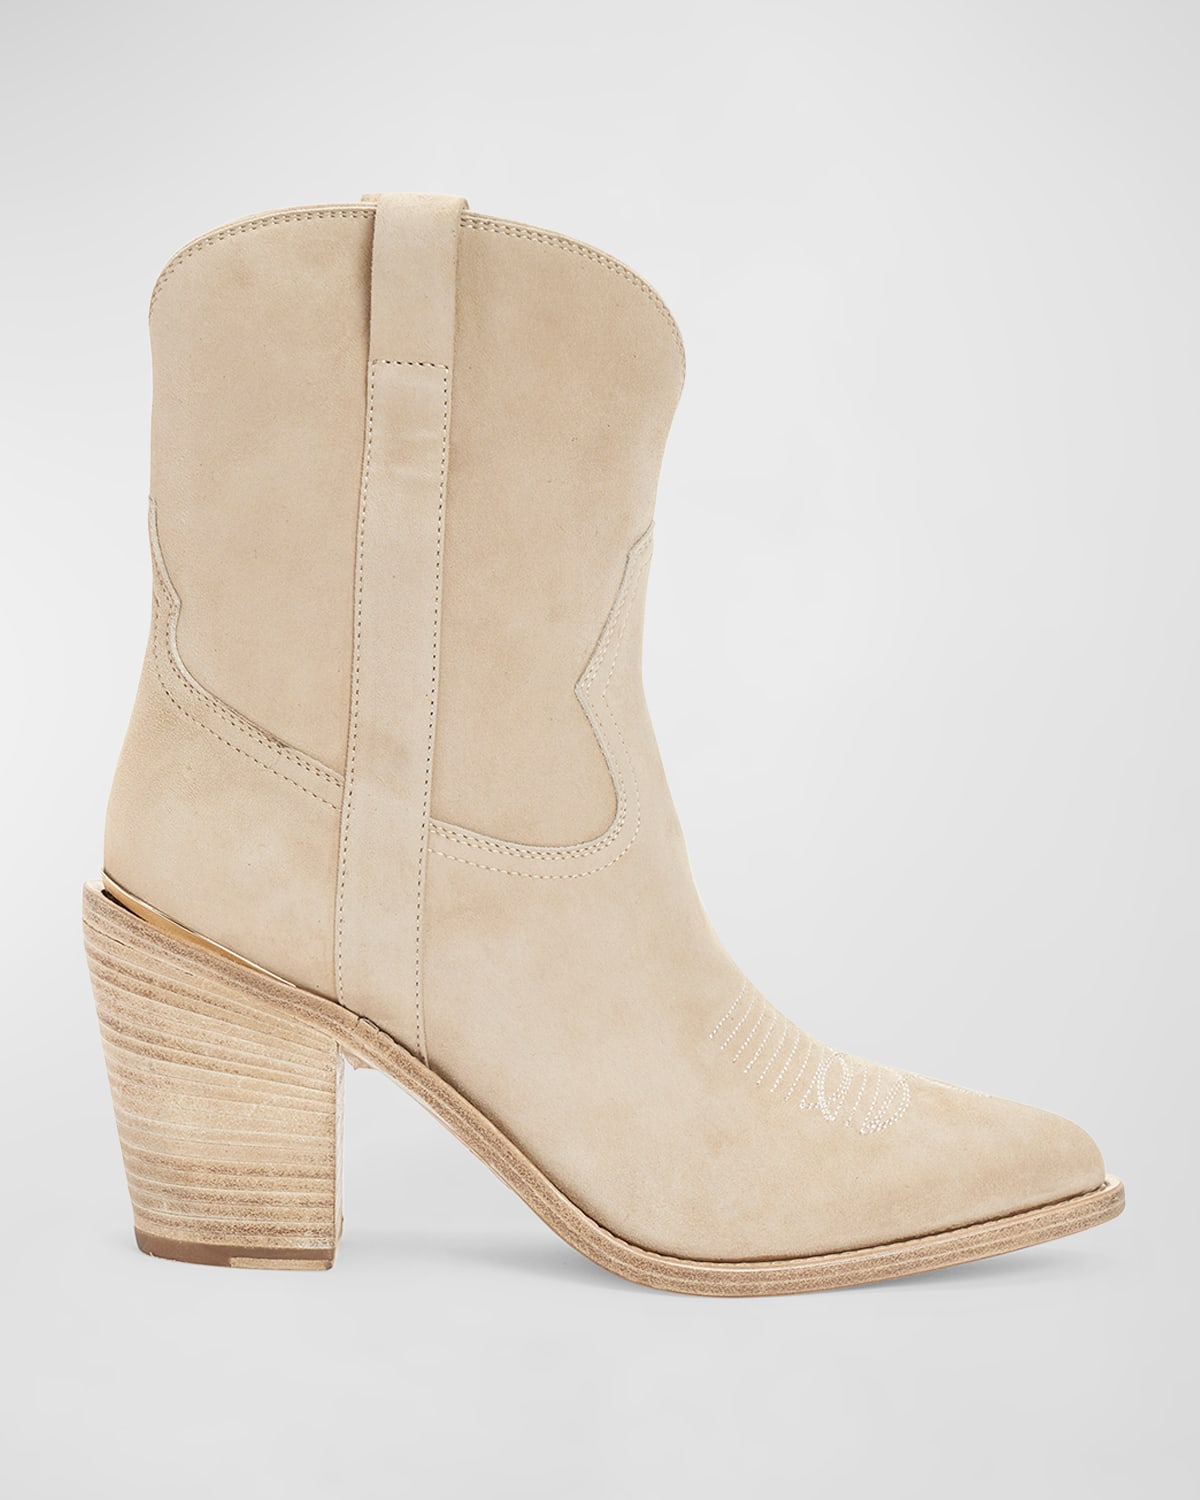 Leigh Anne Suede Western Ankle Booties